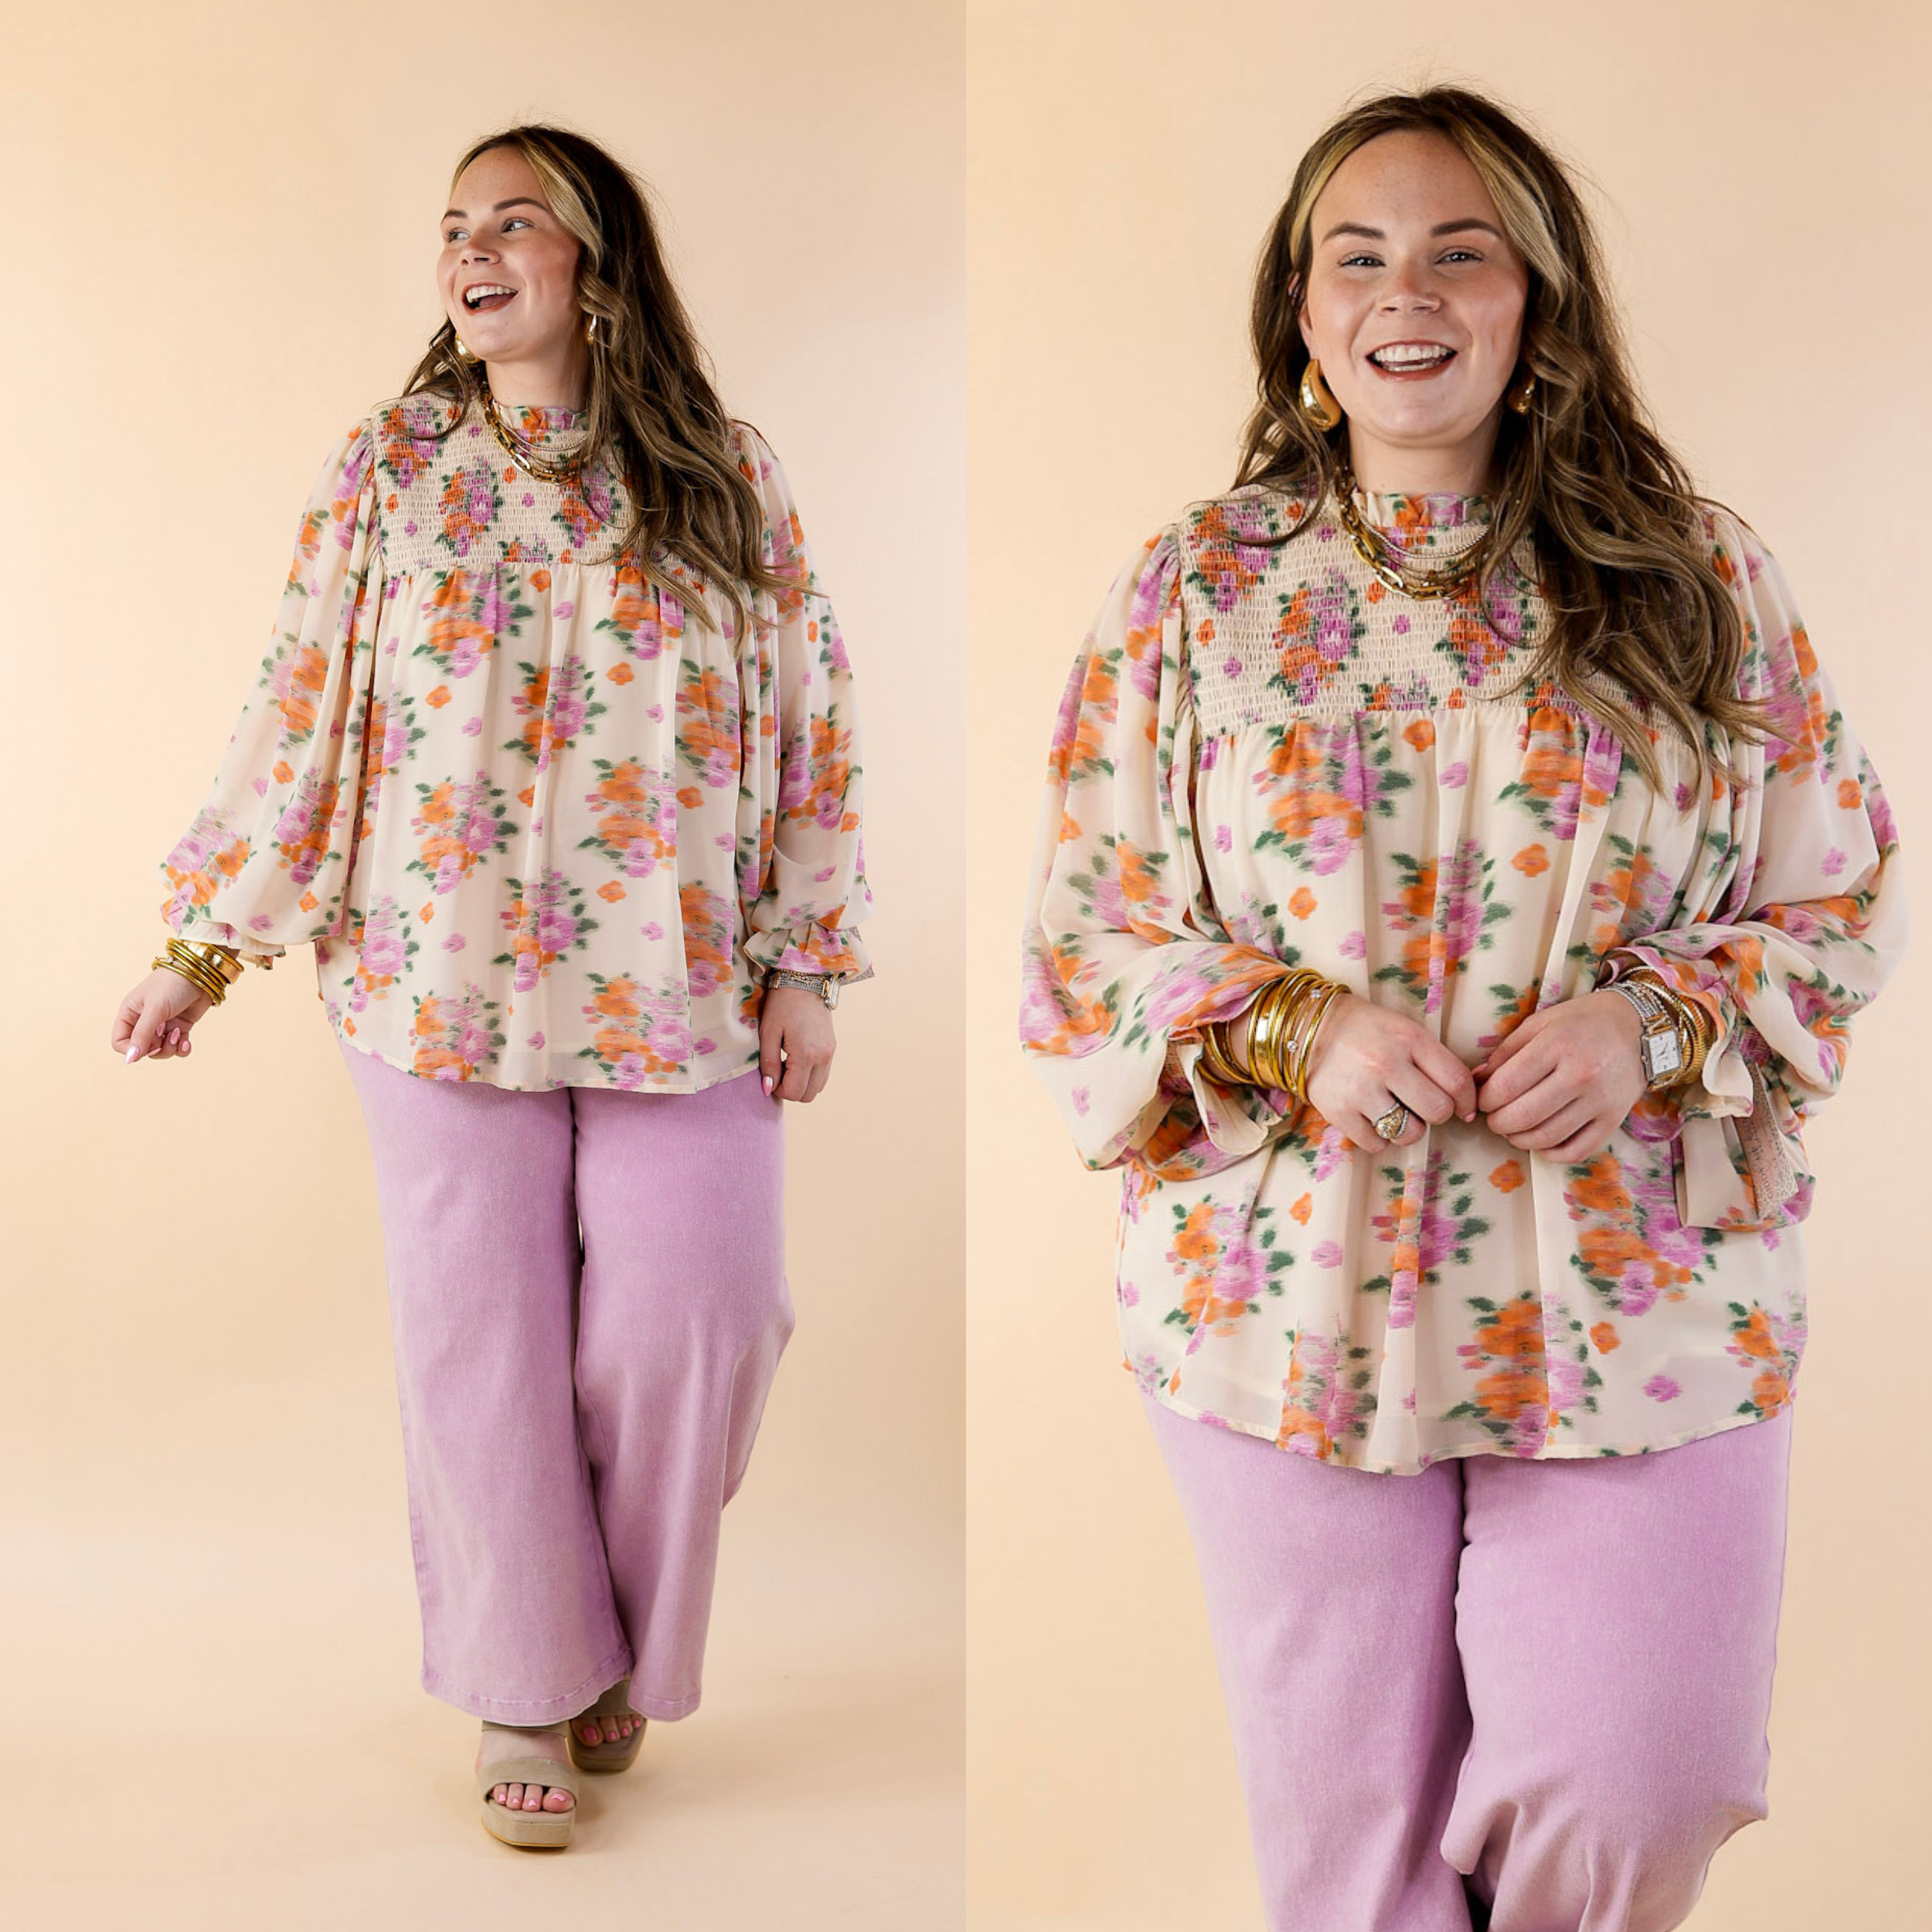 Garden Glow Watercolor Floral Print Blouse with High Neckline in Ivory - Giddy Up Glamour Boutique